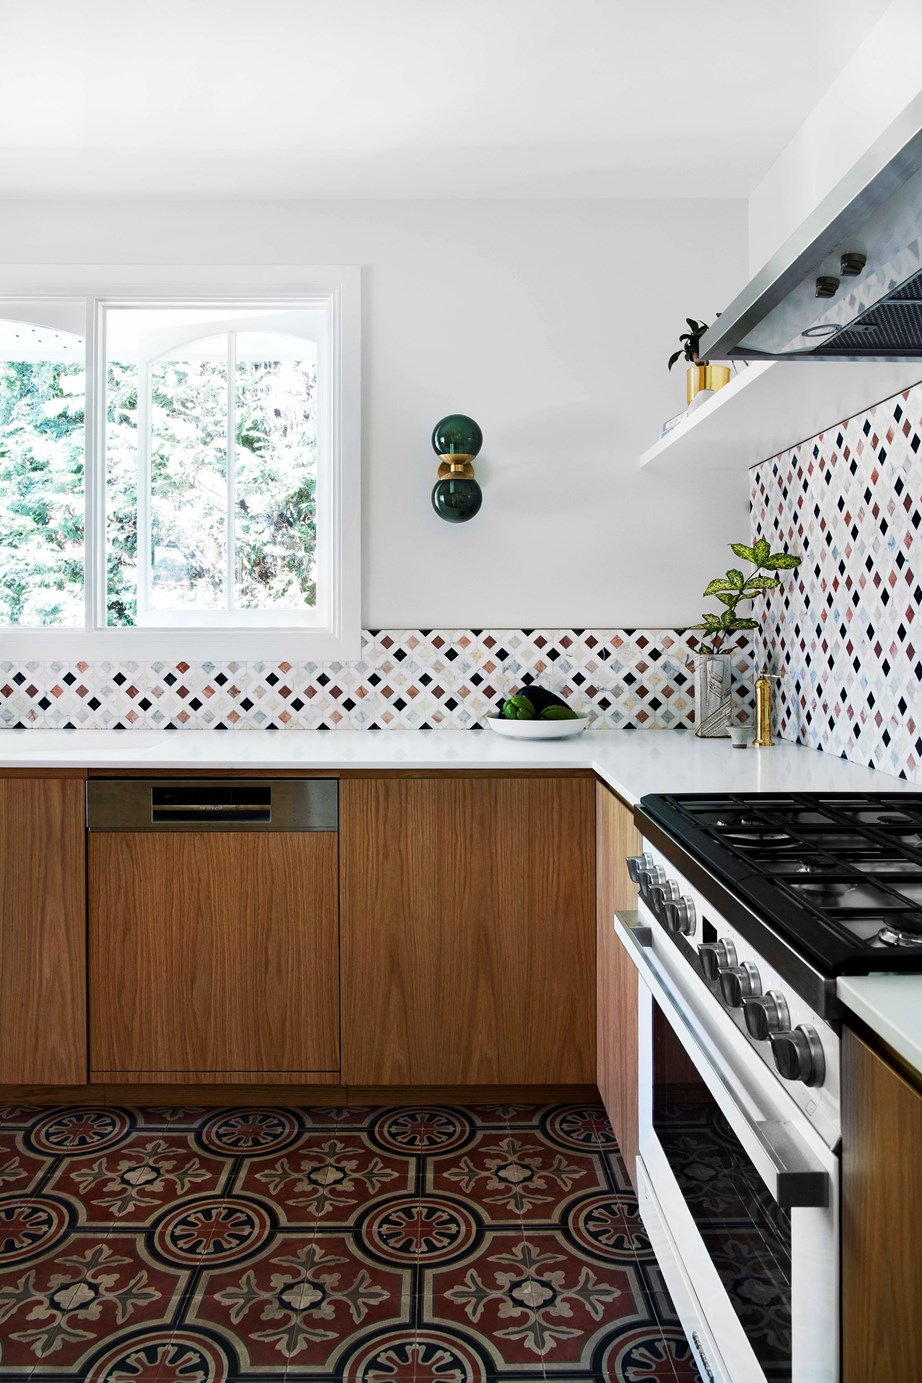 The splashback tiles in [this Moroccan-style kitchen](https://www.homestolove.com.au/lower-north-shore-sydney-home-renovation-22794|target="_blank"), speak to the homeowner's love of travel. Smooth benchtops allow the tiles to do the talking, while floor tiles and an emerald wall sconce layer more colour.